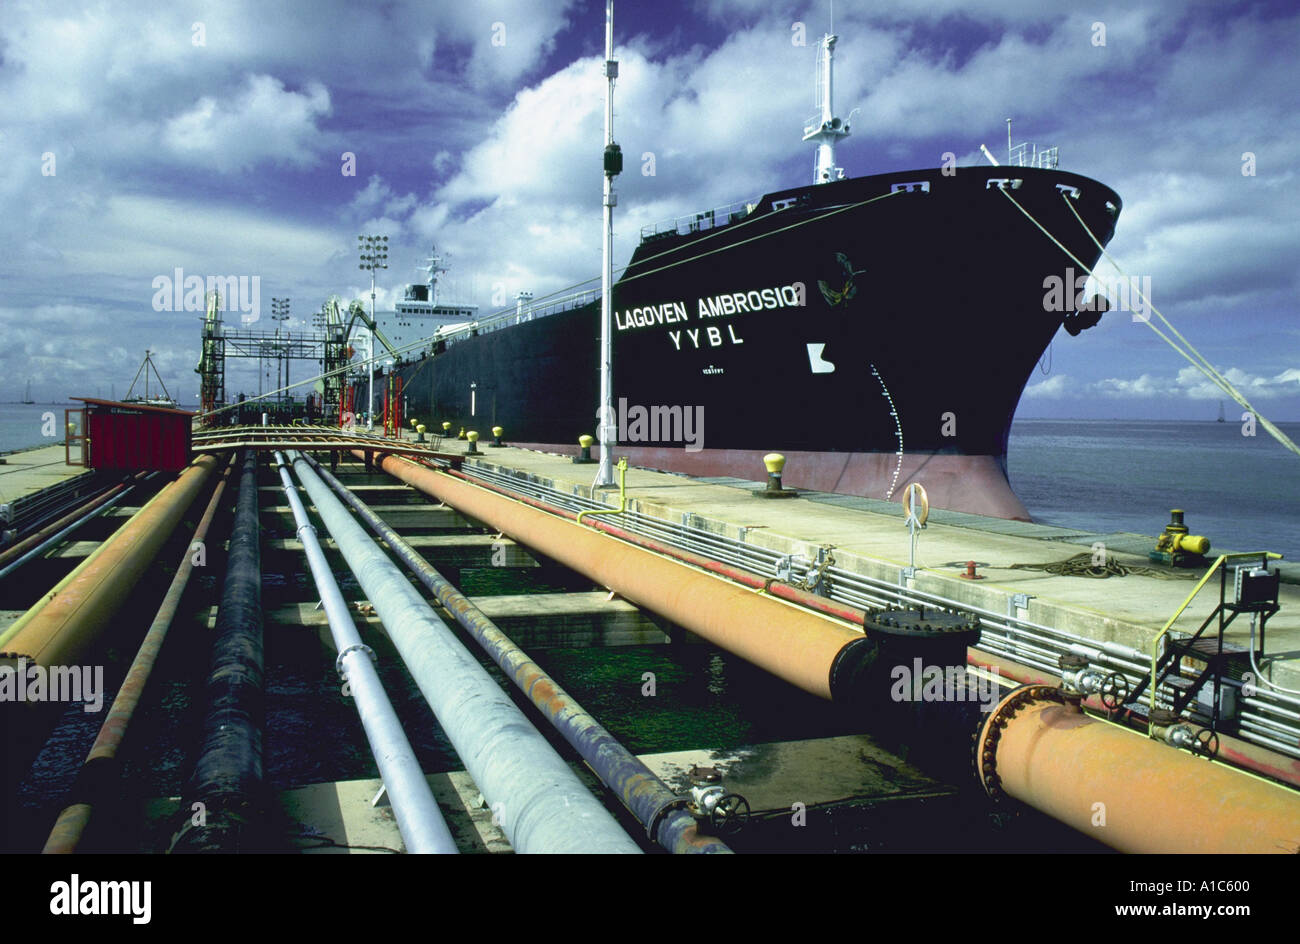 Pipeline and an Lagoven Oil Company oil tanker docked on the shore of Lake Maracaibo Zulia State Venezuela Stock Photo